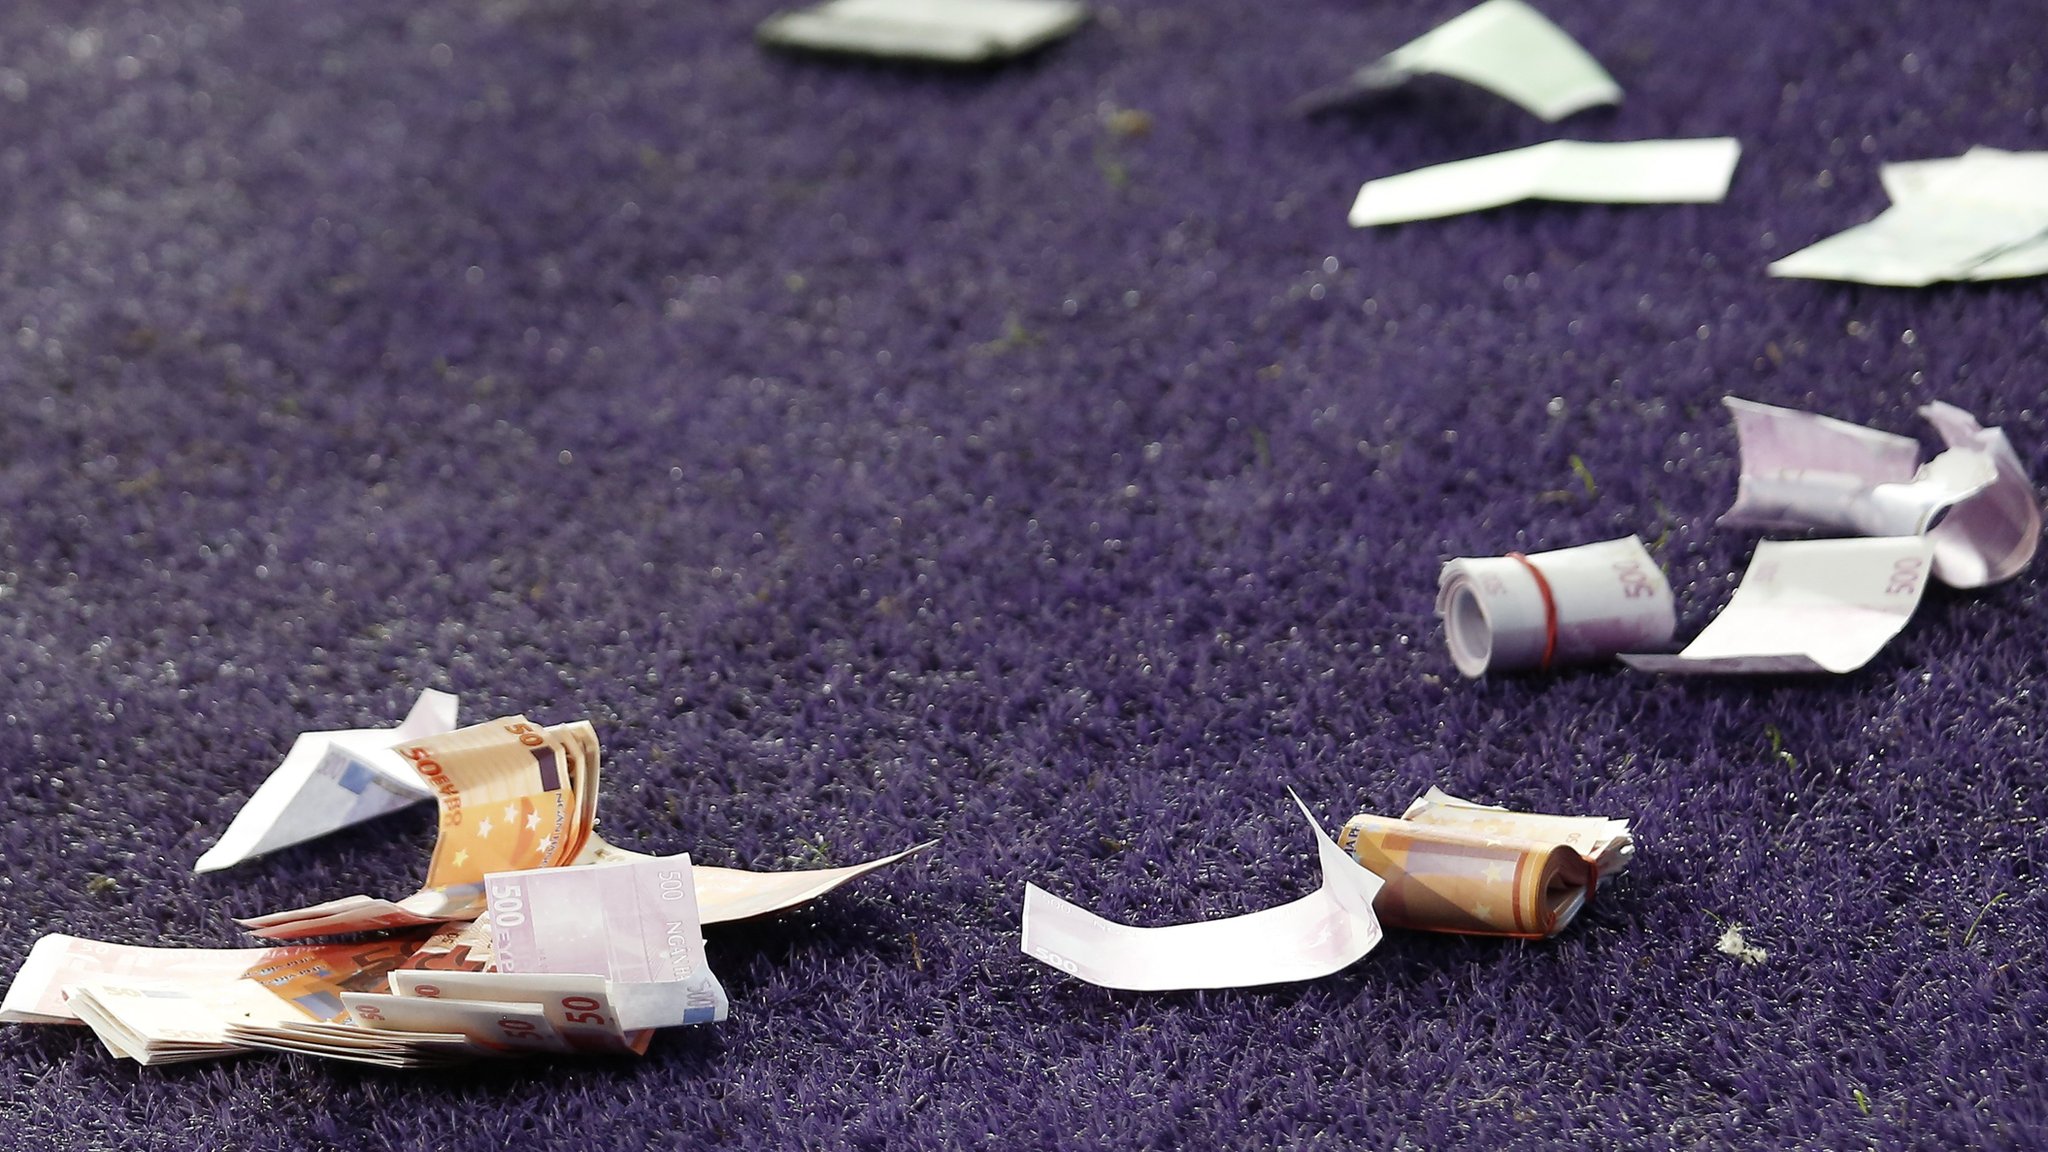 Bayern fans throw fake money on pitch in Anderlecht win